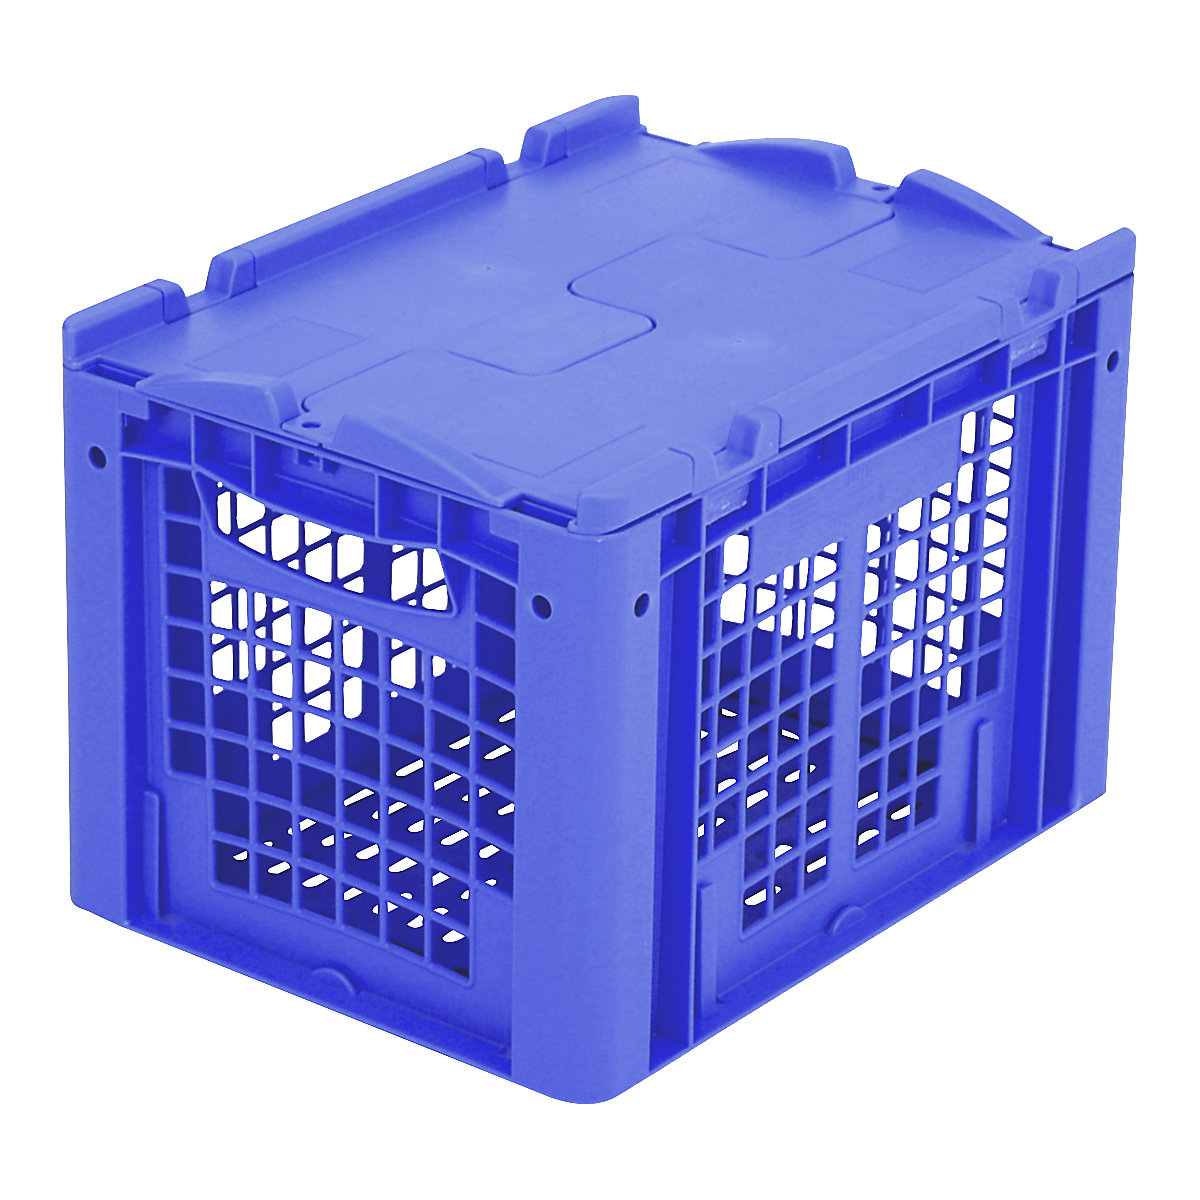 XL Euro stacking container – BITO